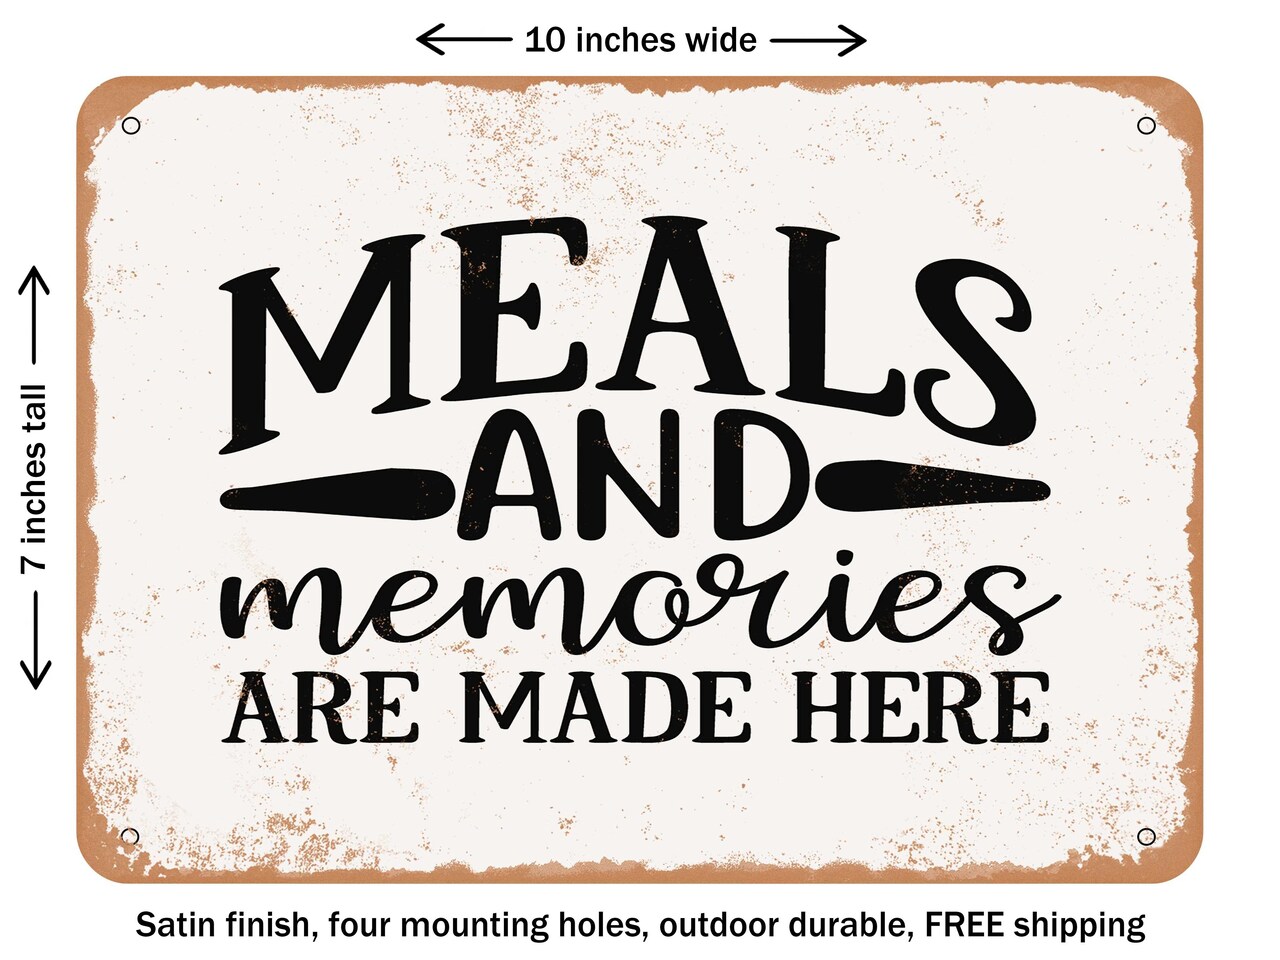 DECORATIVE METAL SIGN - Meals and Memories Are Made Here - Vintage Rusty Look